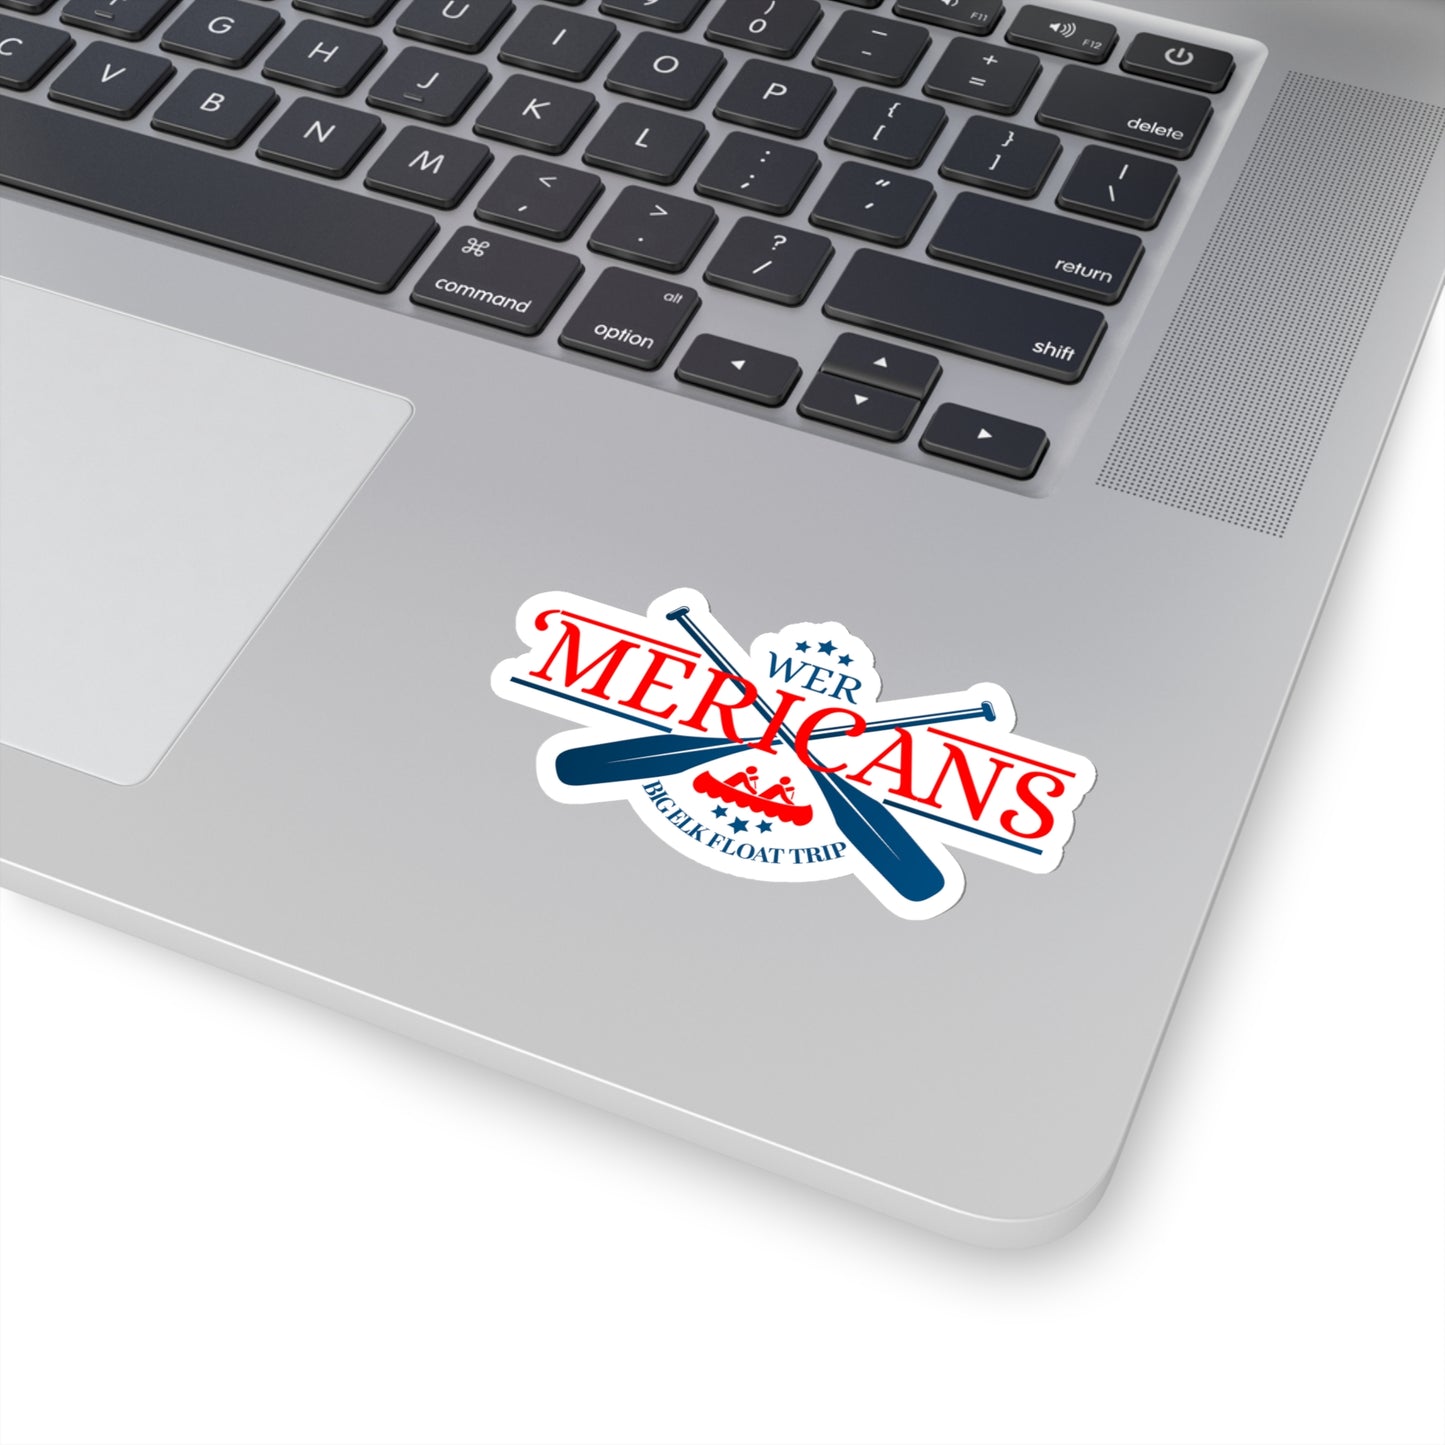 LIMITED EDITION 'MERICANS Stickers - Expressive DeZien 